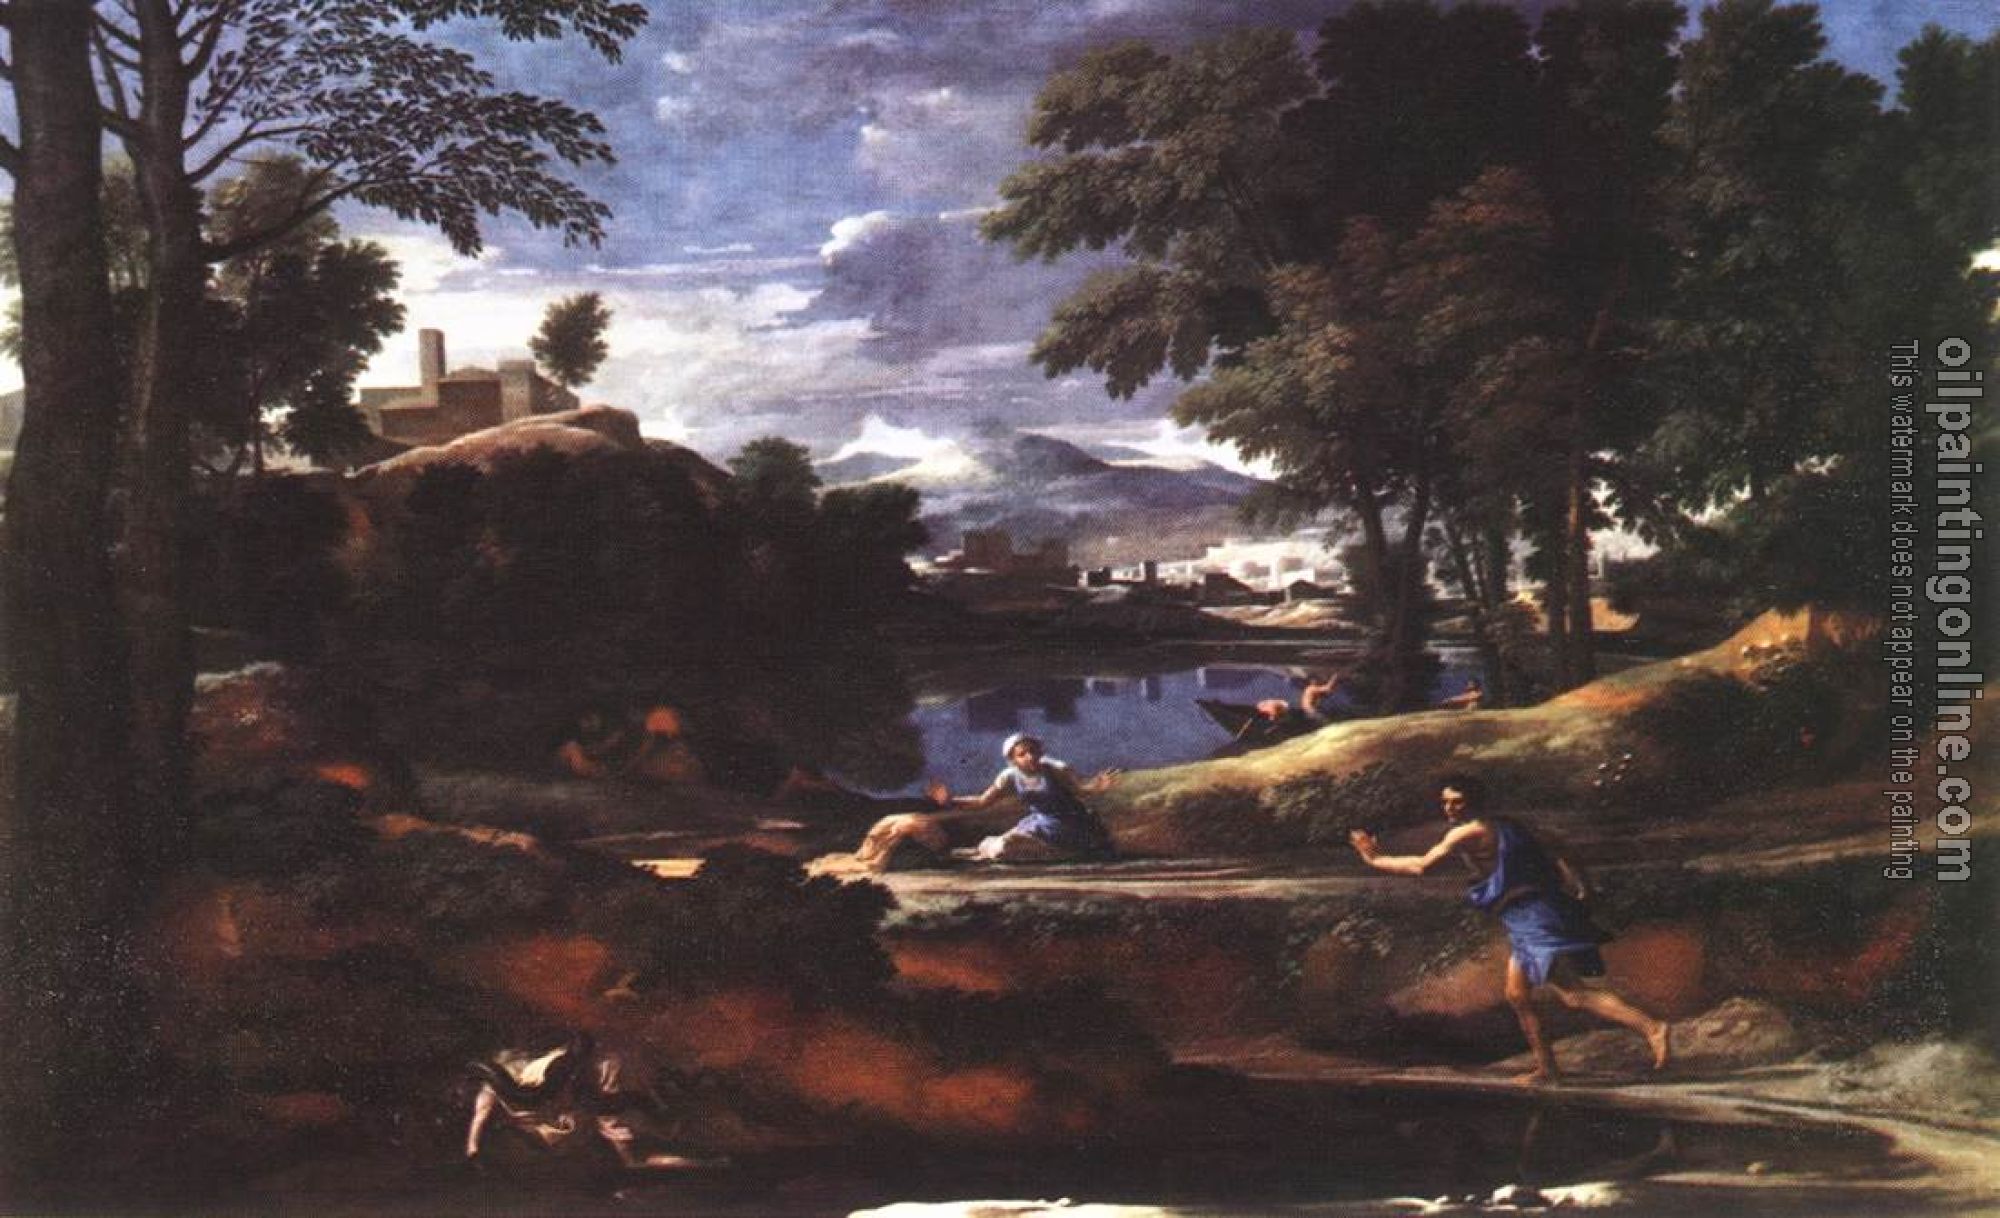 Poussin, Nicolas - Landscape with man killed by snake